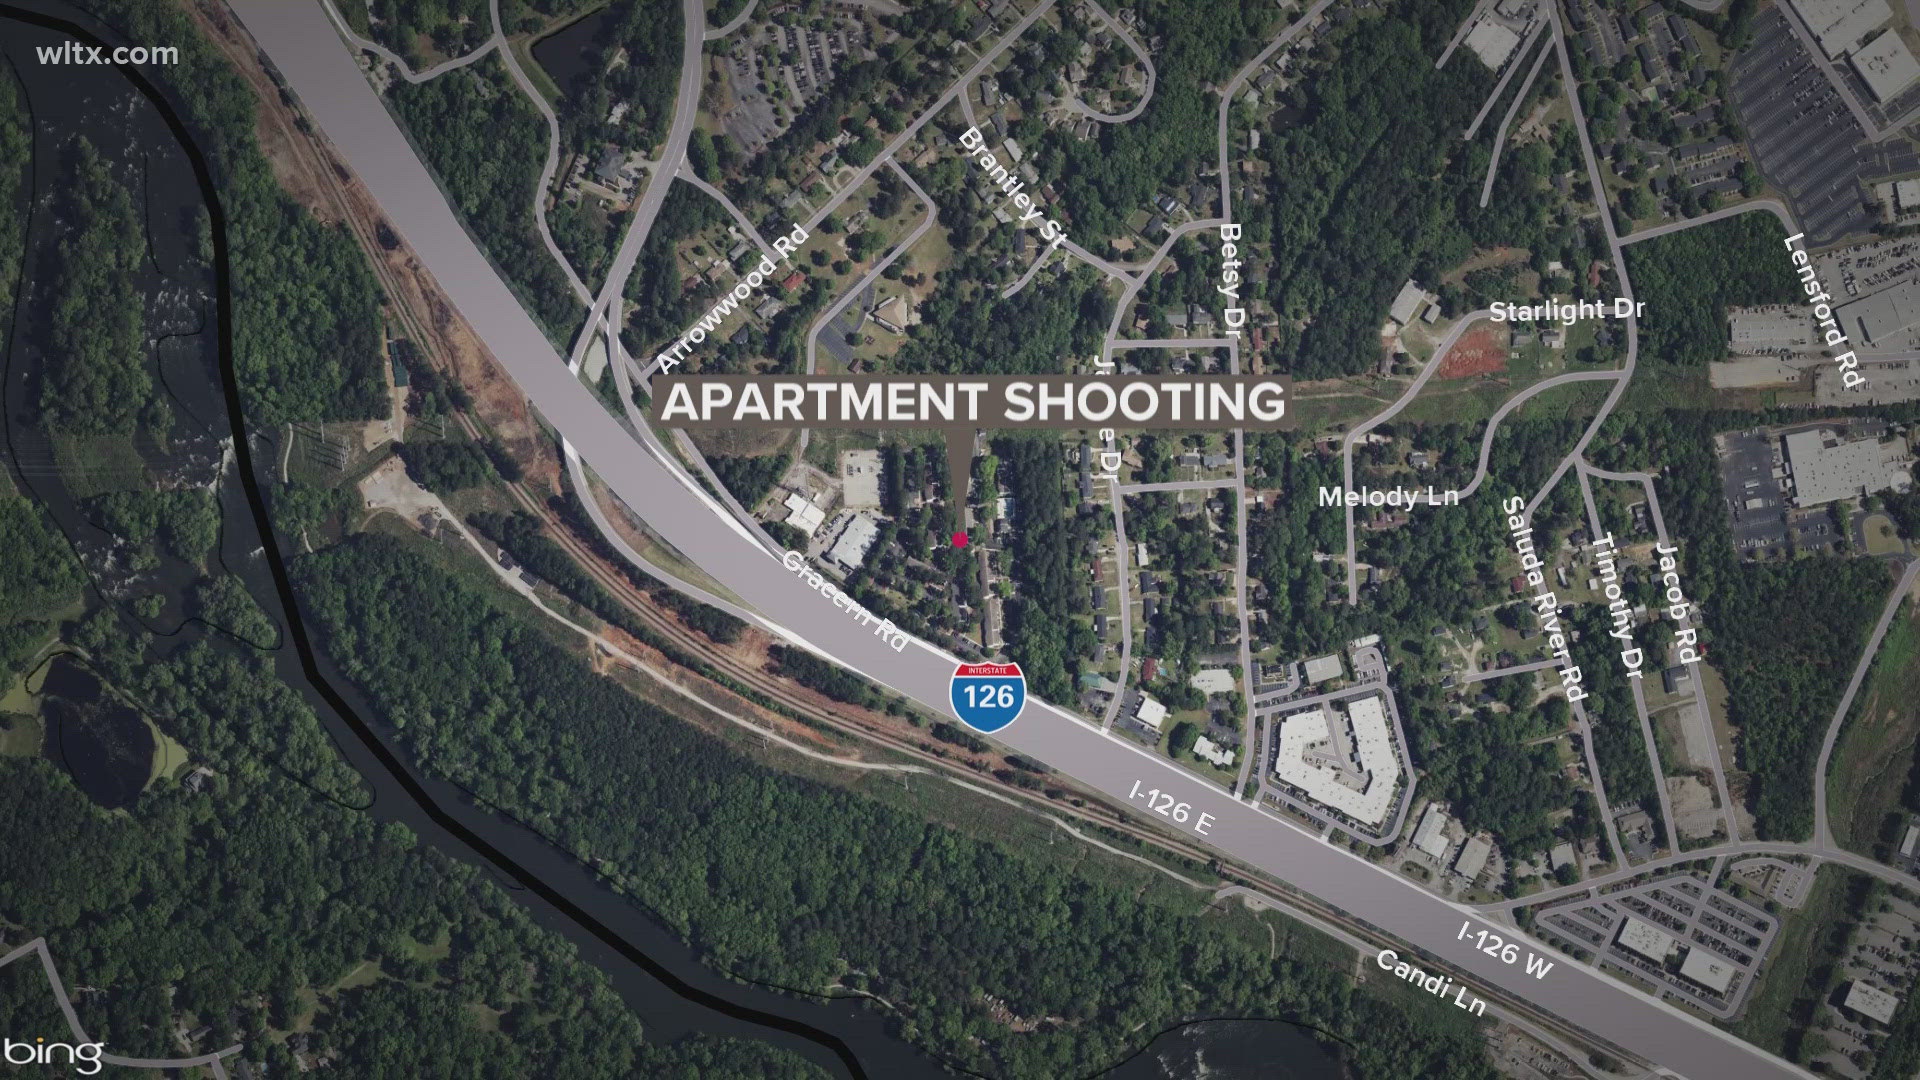 Authorities say a man was taken from the scene in critical condition following an early morning shooting in Columbia on Saturday.